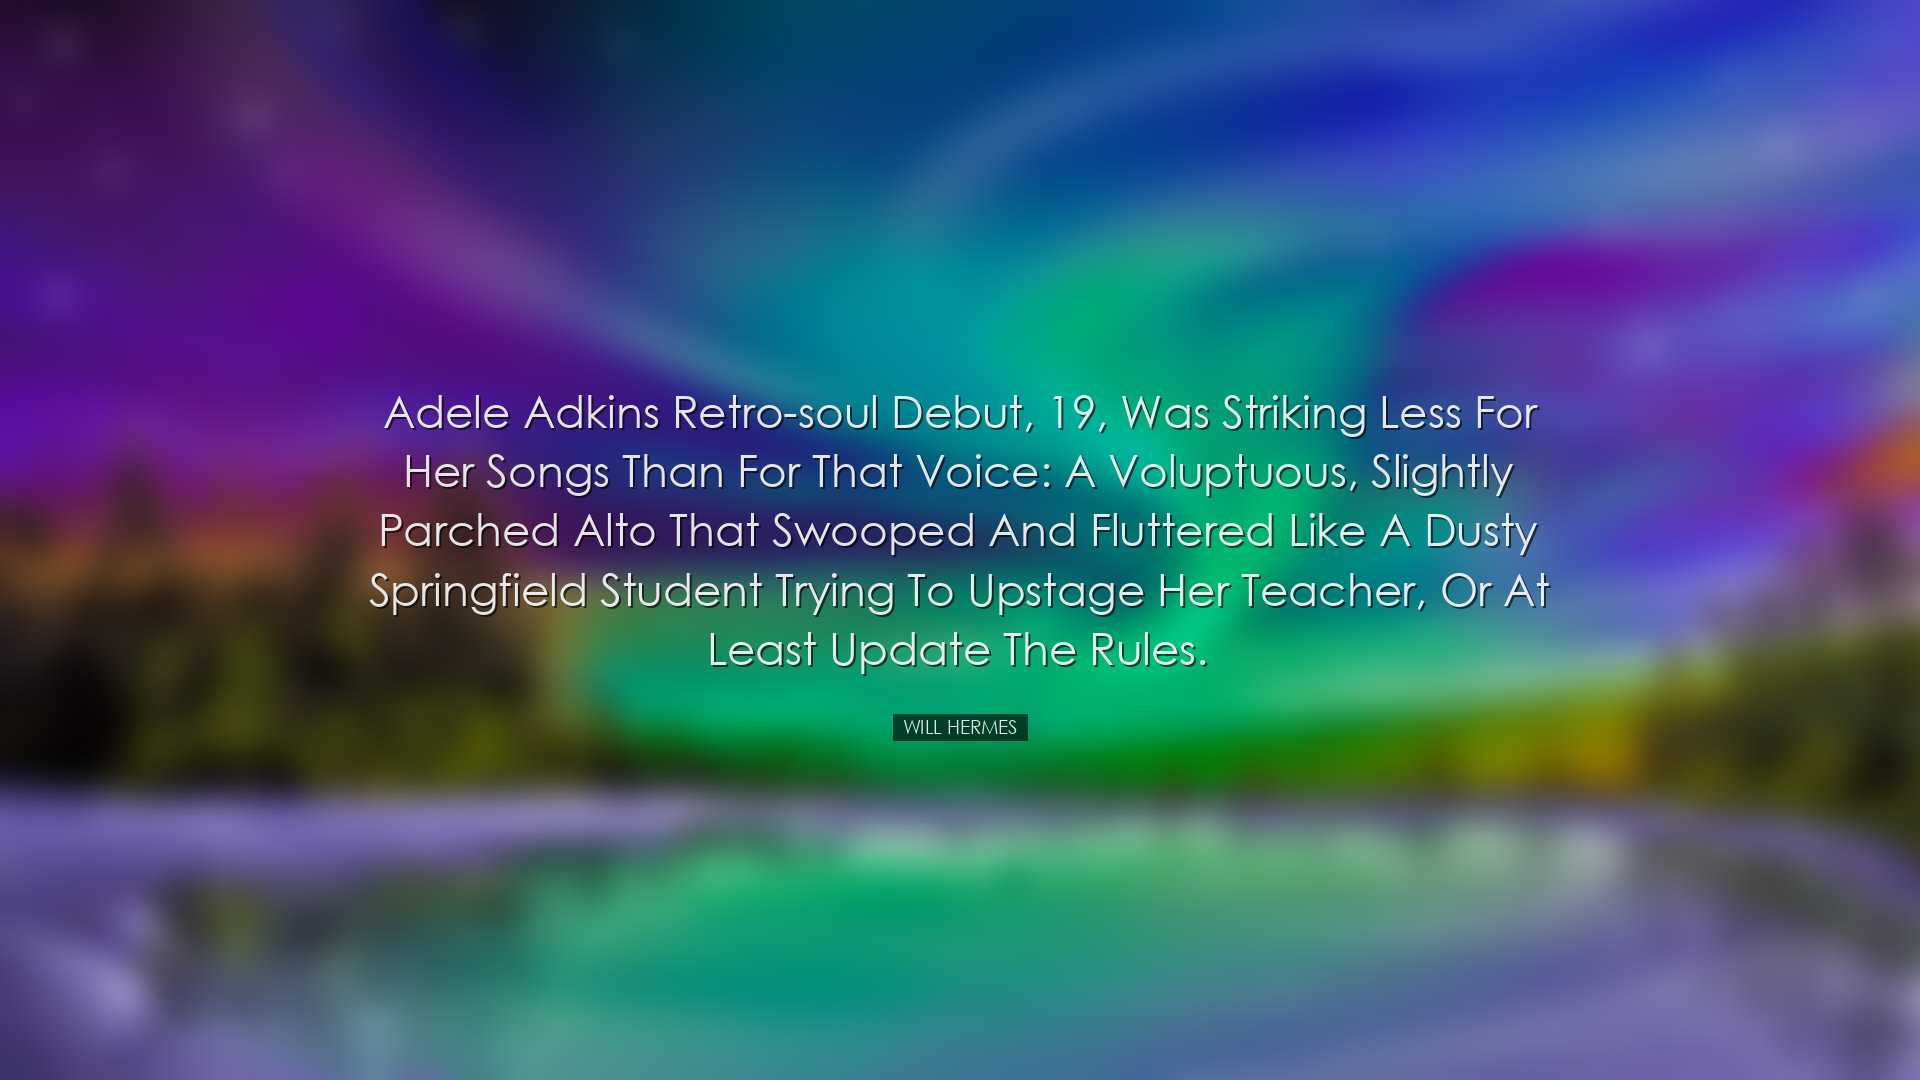 Adele Adkins retro-soul debut, 19, was striking less for her songs